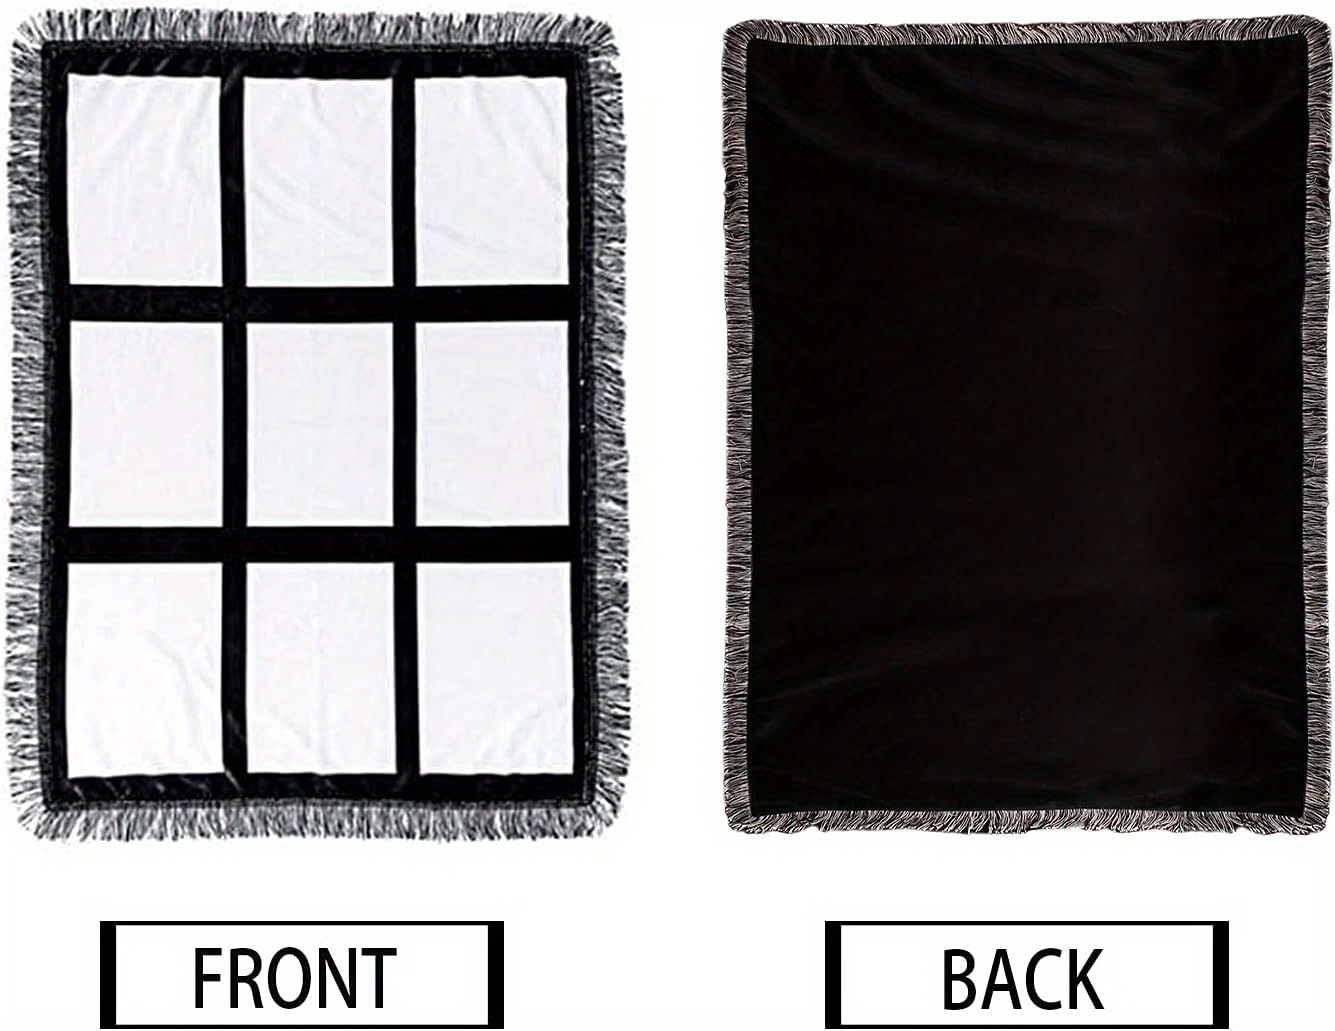 9-Panel Blank Sublimation Blanket - 60in x 40in – REAL BLANKS